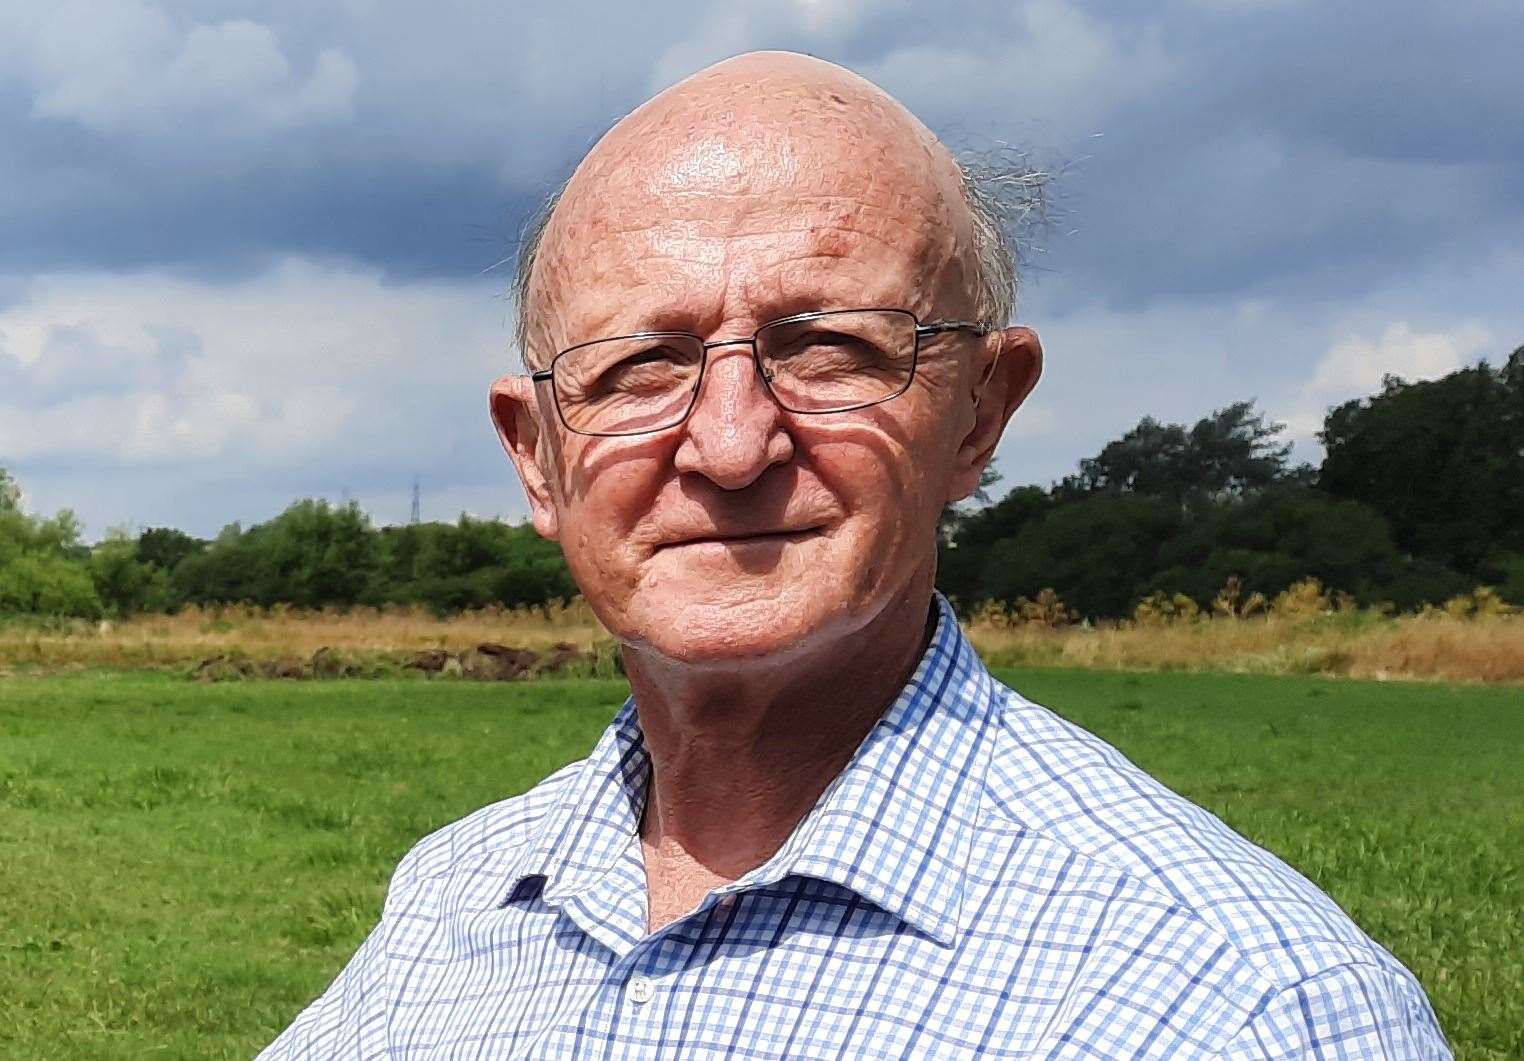 Philip Lewis, 73, fears the one-way diversion in Canterbury is going to add to traffic issues in Fordwich, where he has lived for the past 16 years